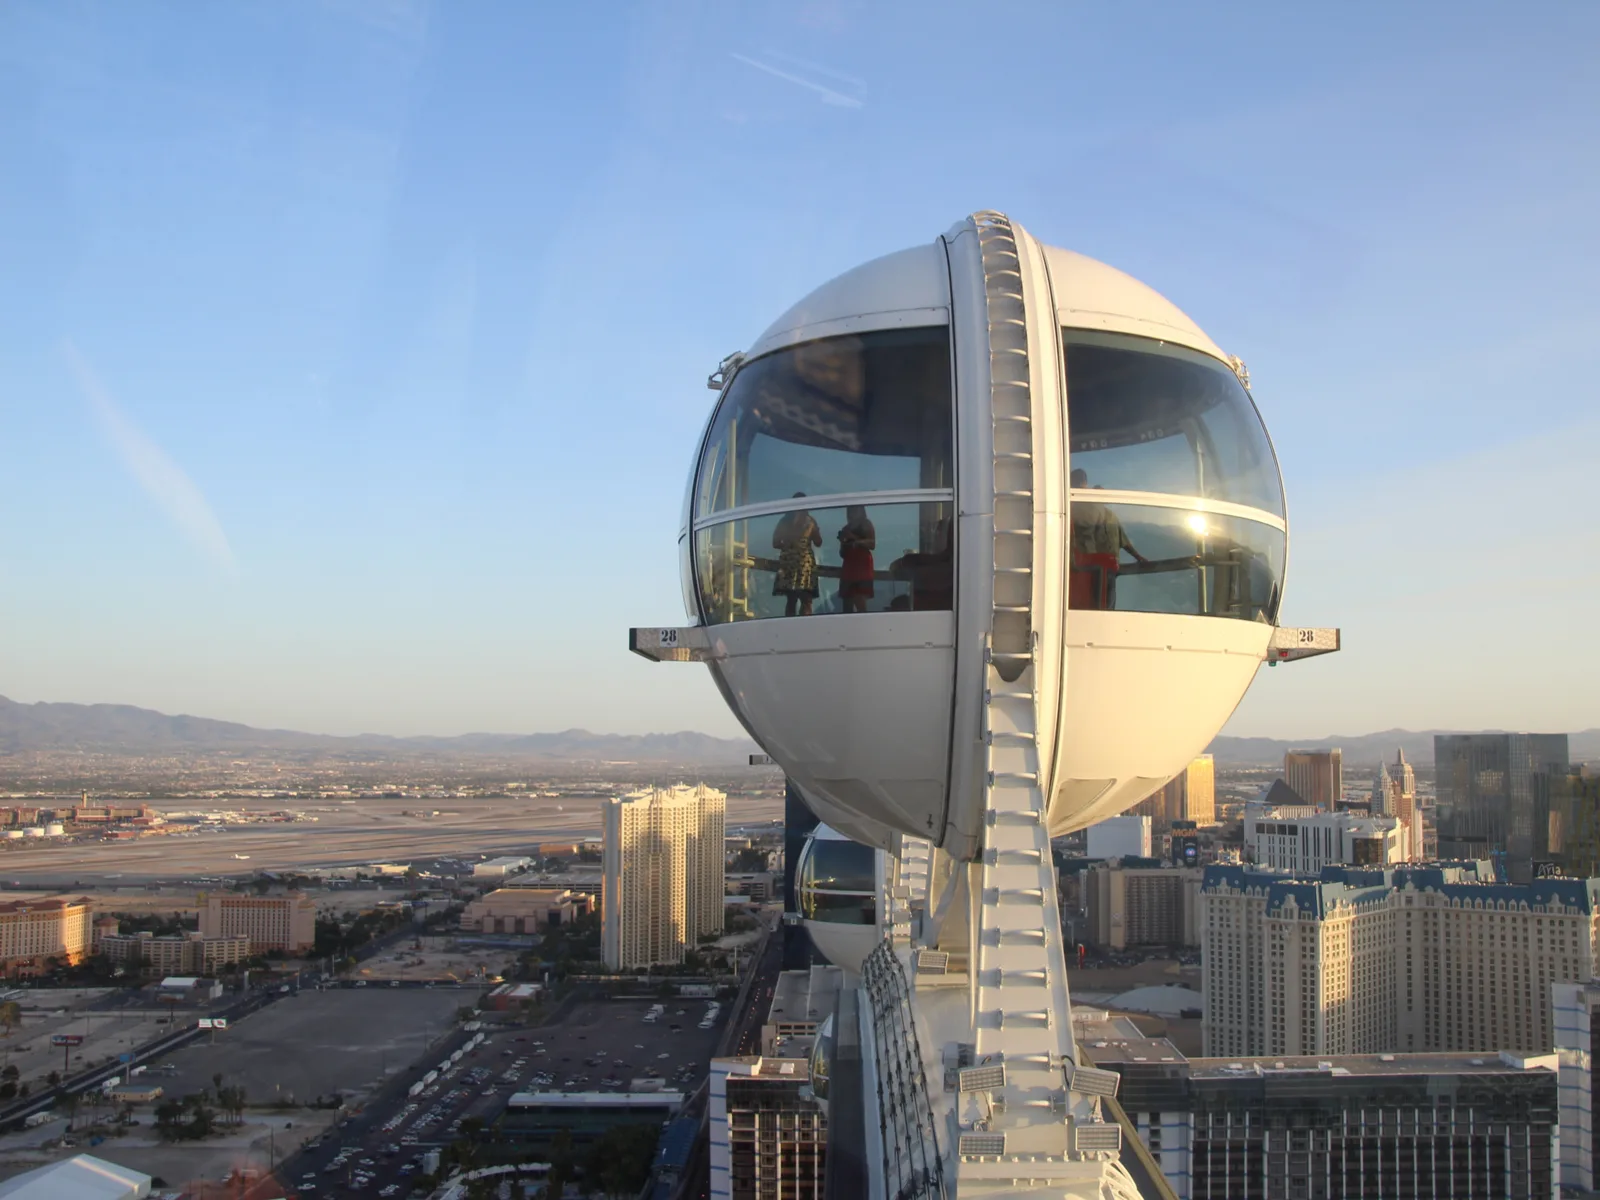 View from the world's second-highest ferris wheel, the vegas high roller, one of the best things to do in Las Vegas